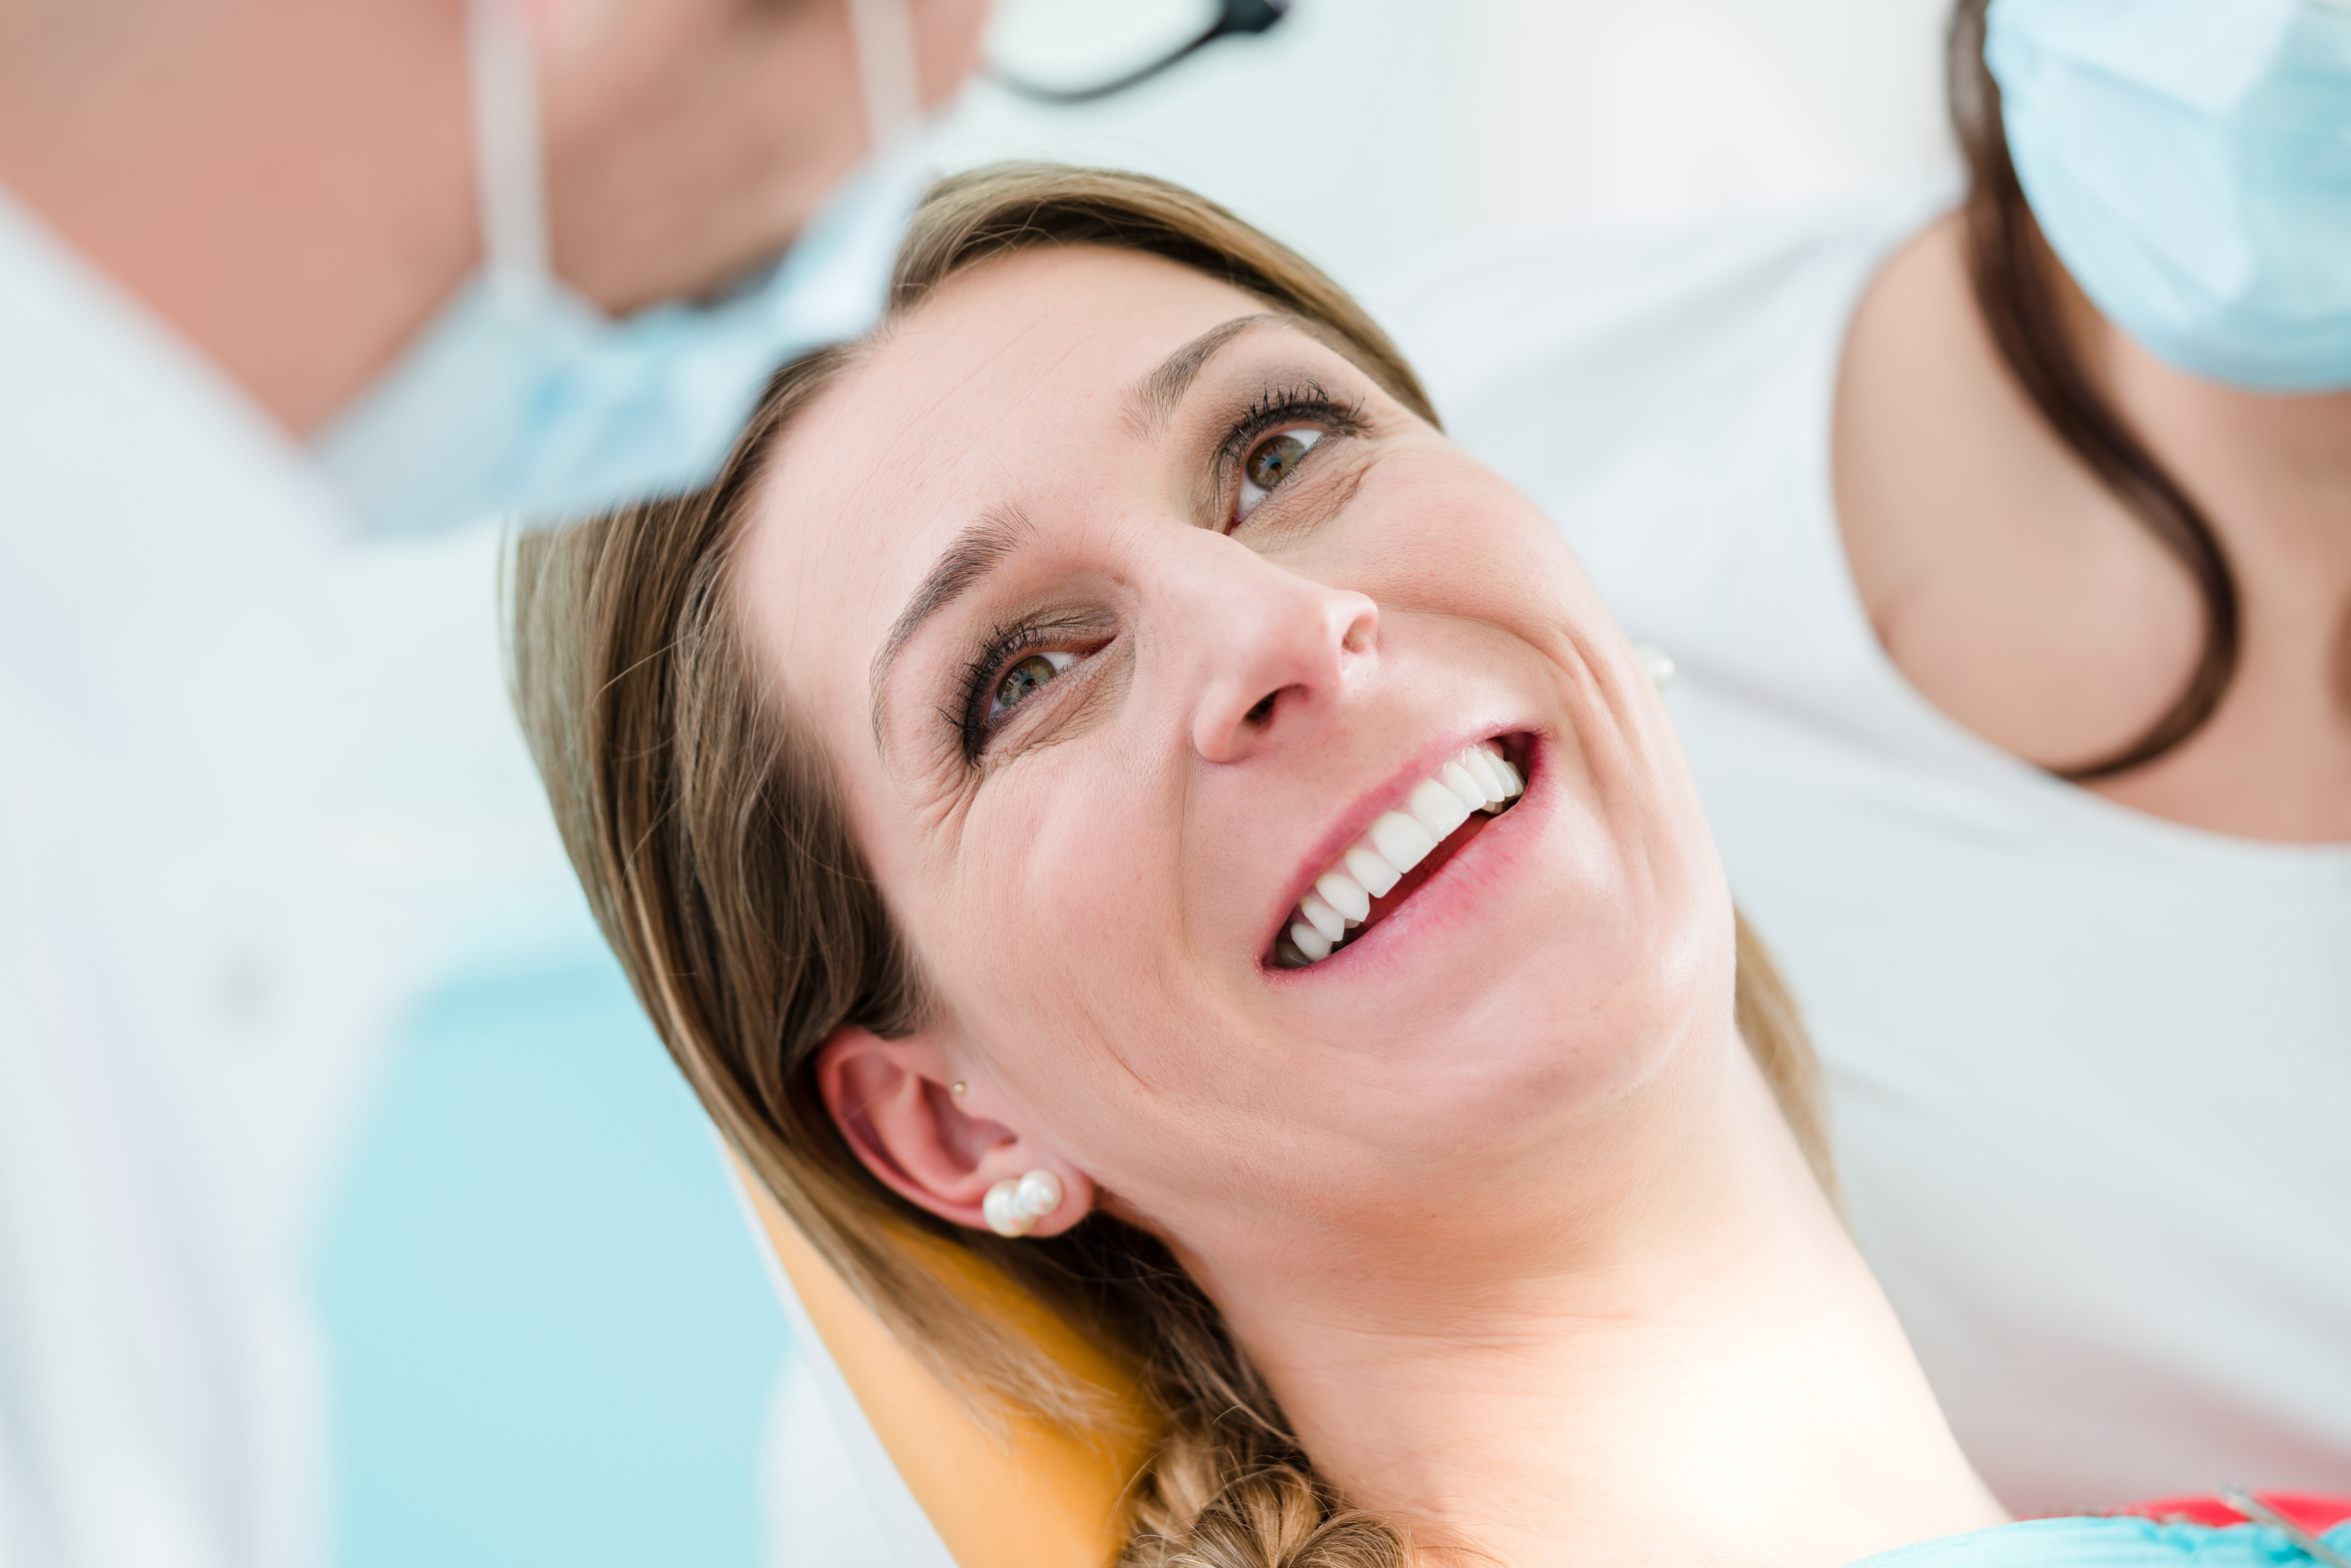 Dentist, Woman, tooth, teeth, smiling, clean, toothy, man, Dentistry, office, surgery, clinic, dentists office, dental, patient, treatment, doctor, seeing, Profession, occupation, working, people, person, room, Caucasian, white, stomatology fotolia_118705539_l.jpg